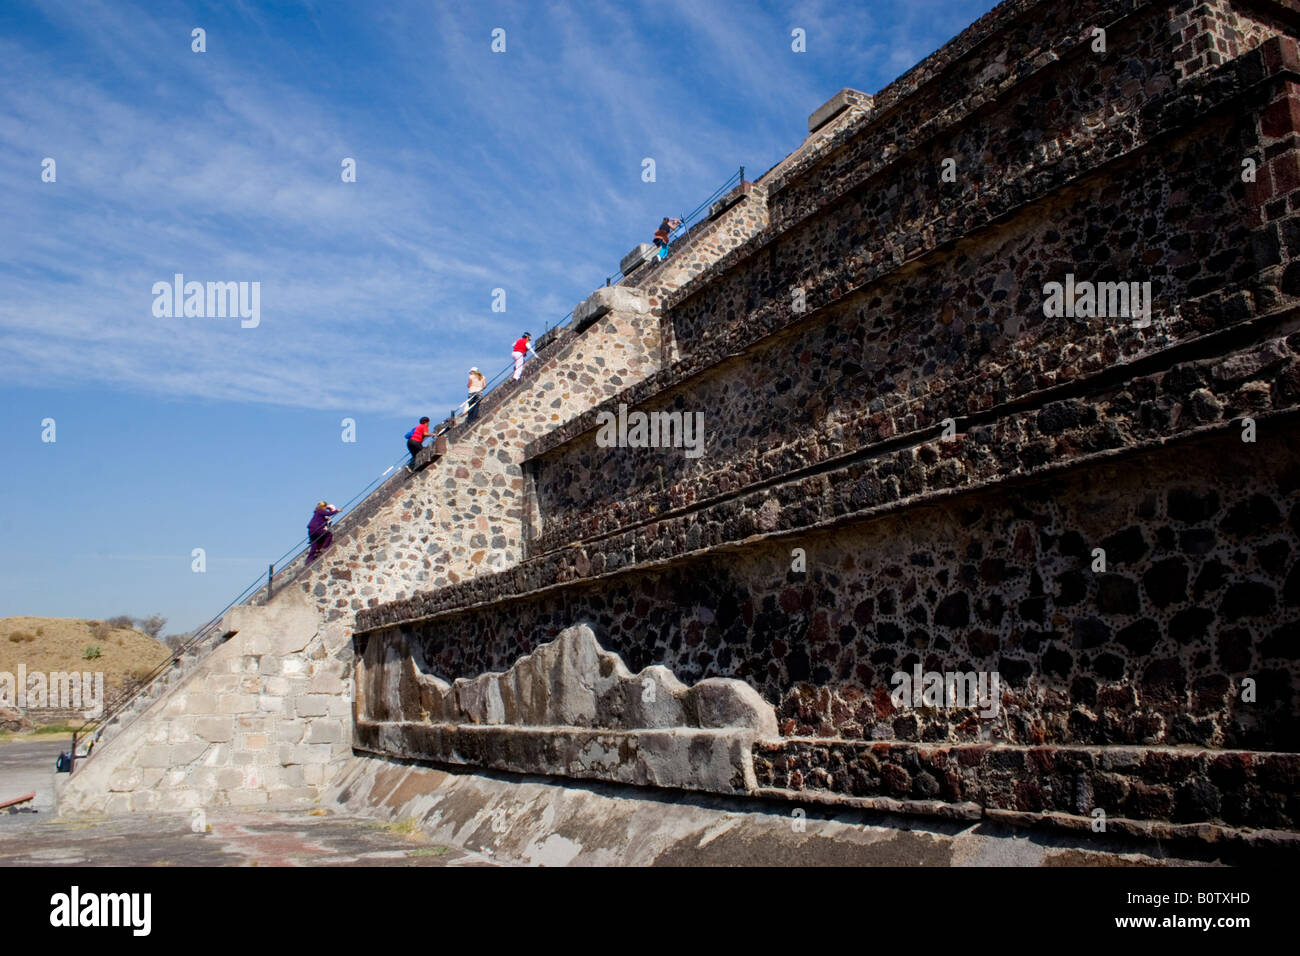 Tourists climb the Pyramid of the Moon at Teotihuacan, the largest pre-Columbian city in Mexico Stock Photo